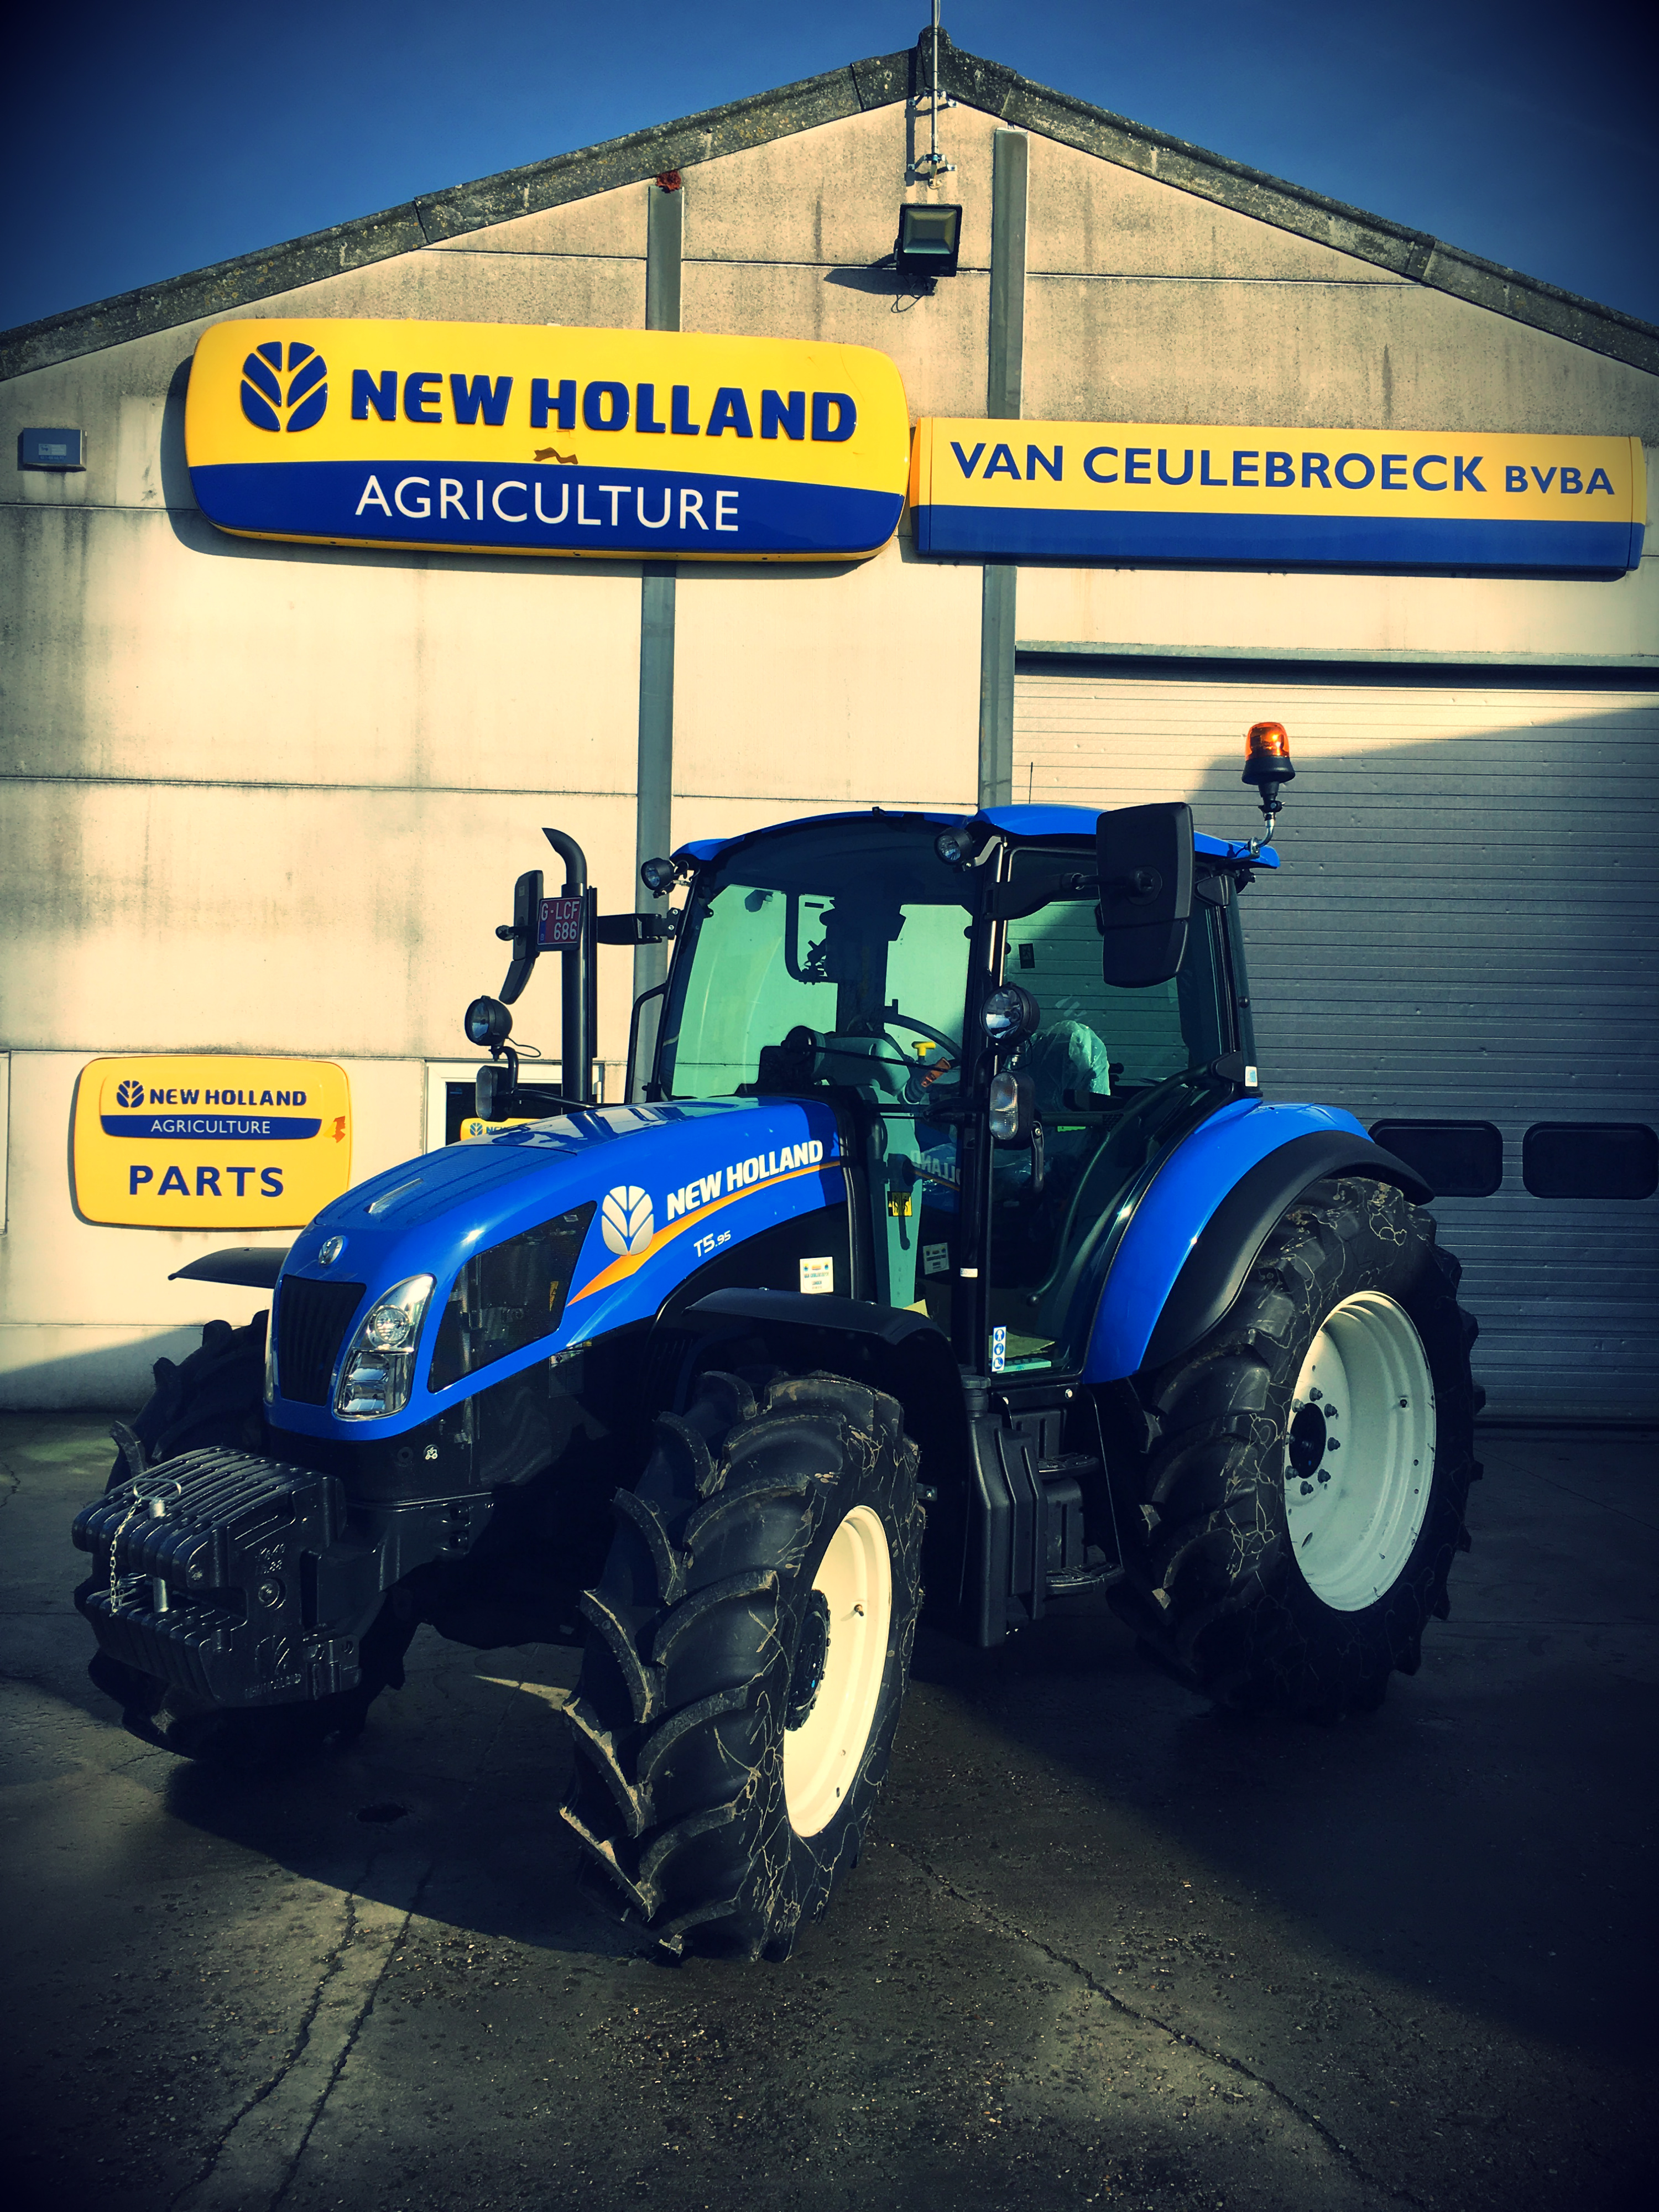 New Holland T5.95 Dual Command afgeleverd !!